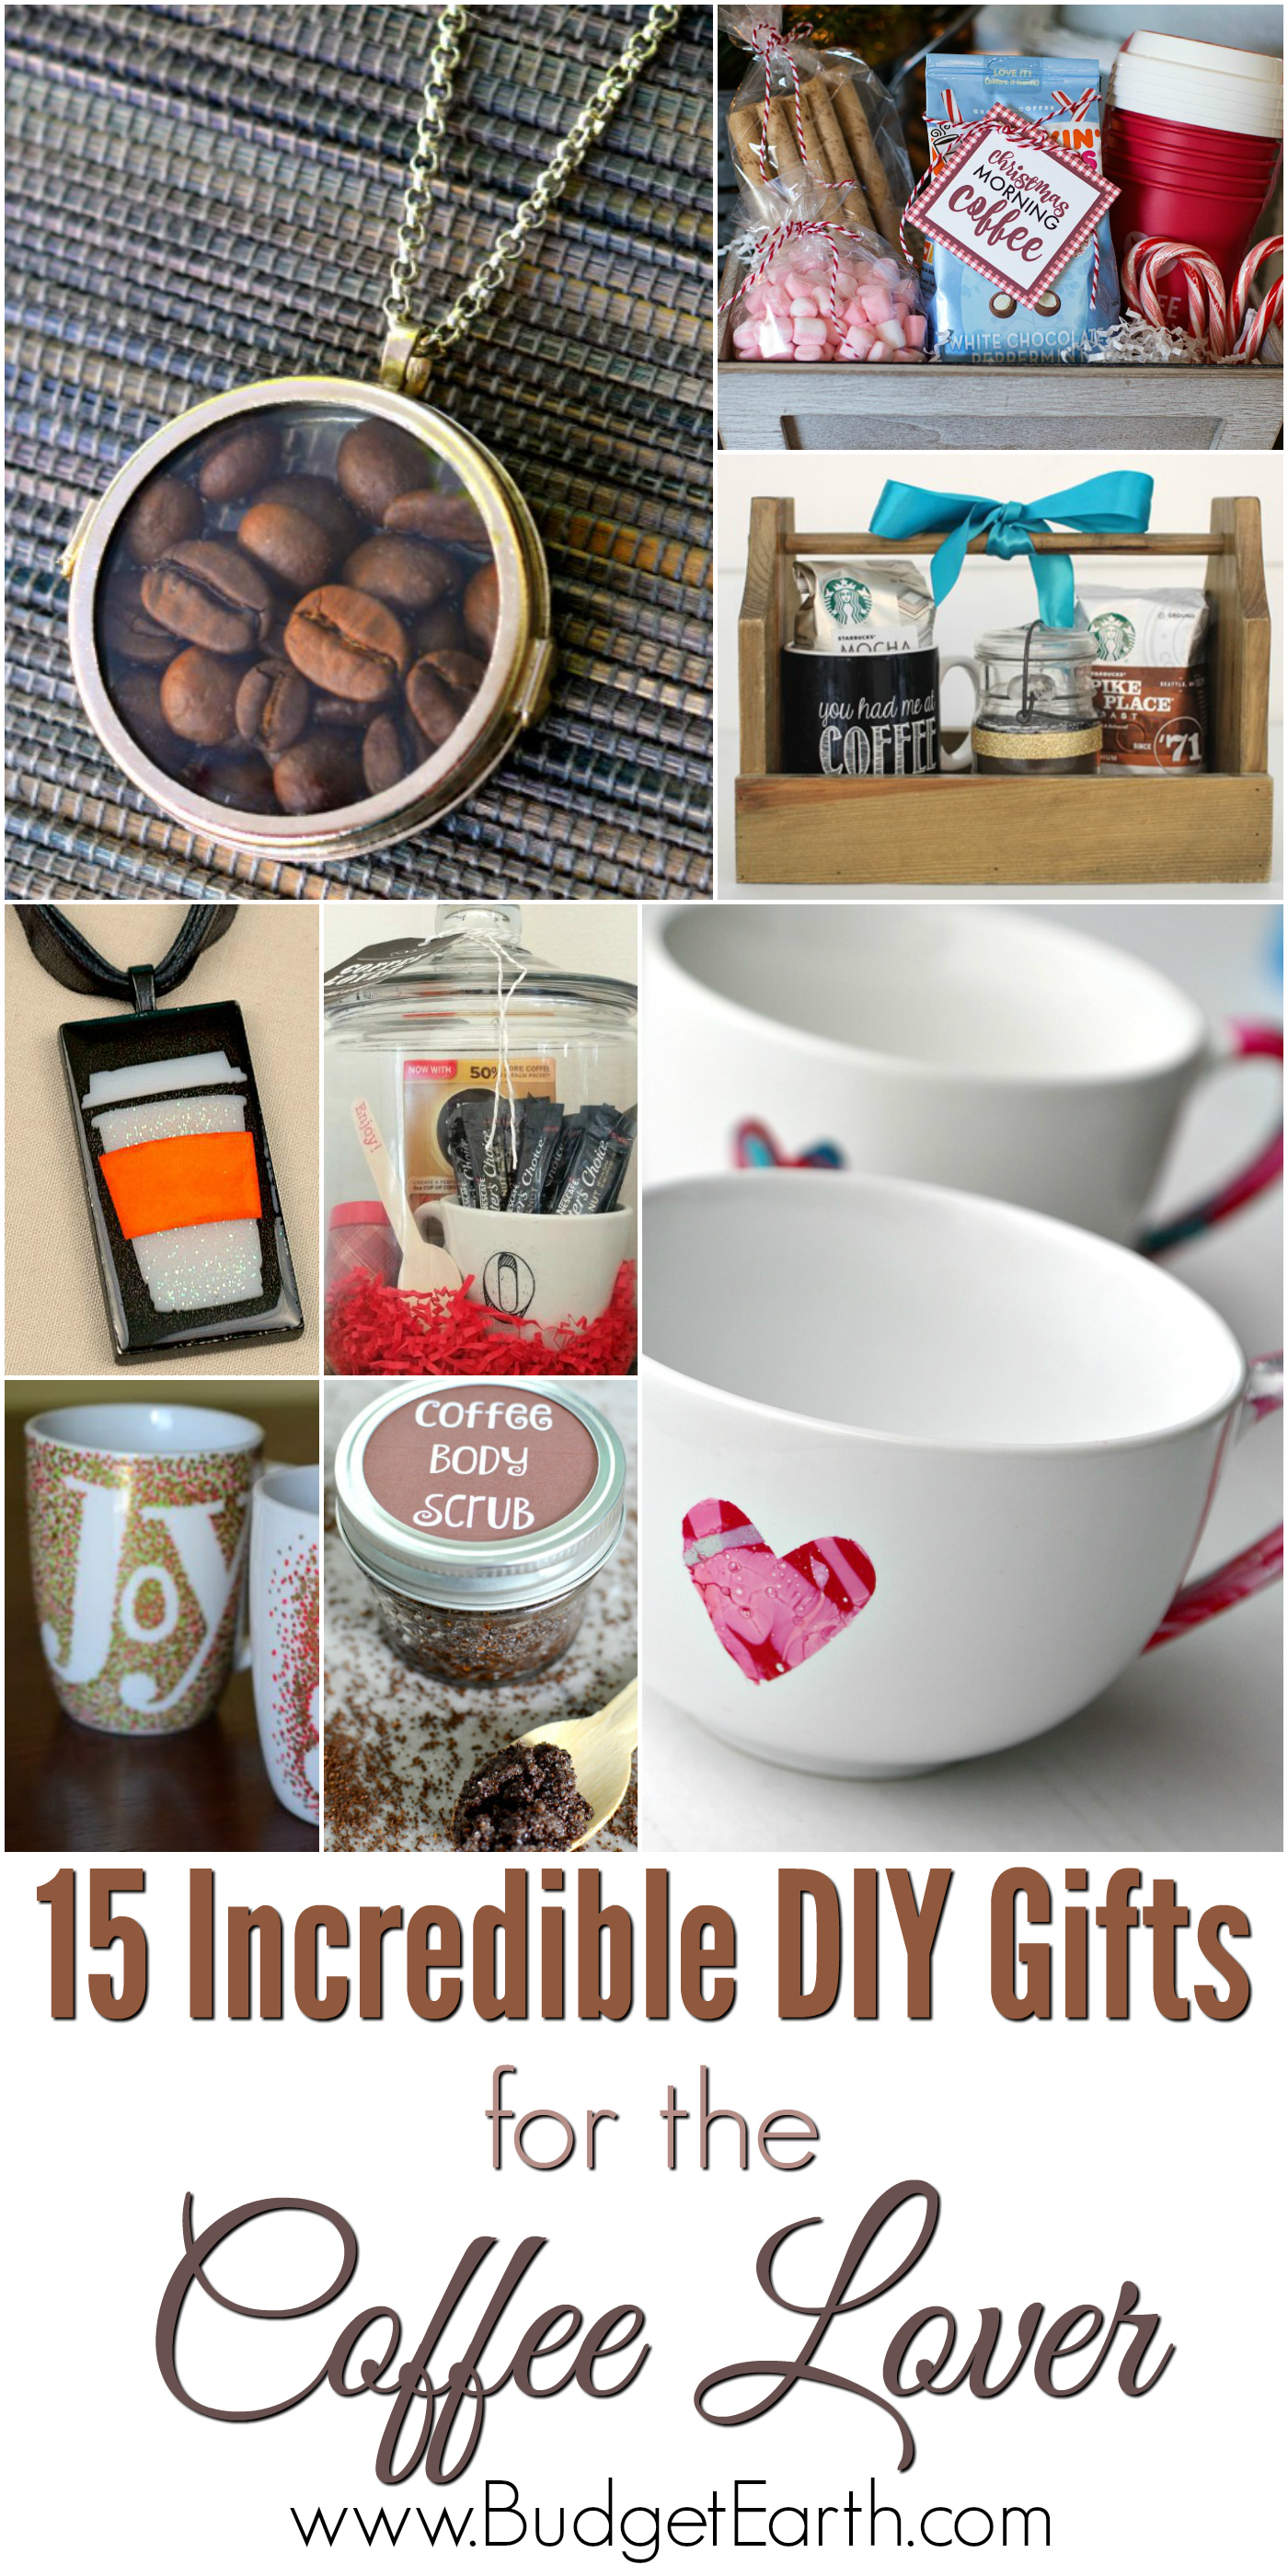 Gifts for Coffee Lovers - Florence Revival